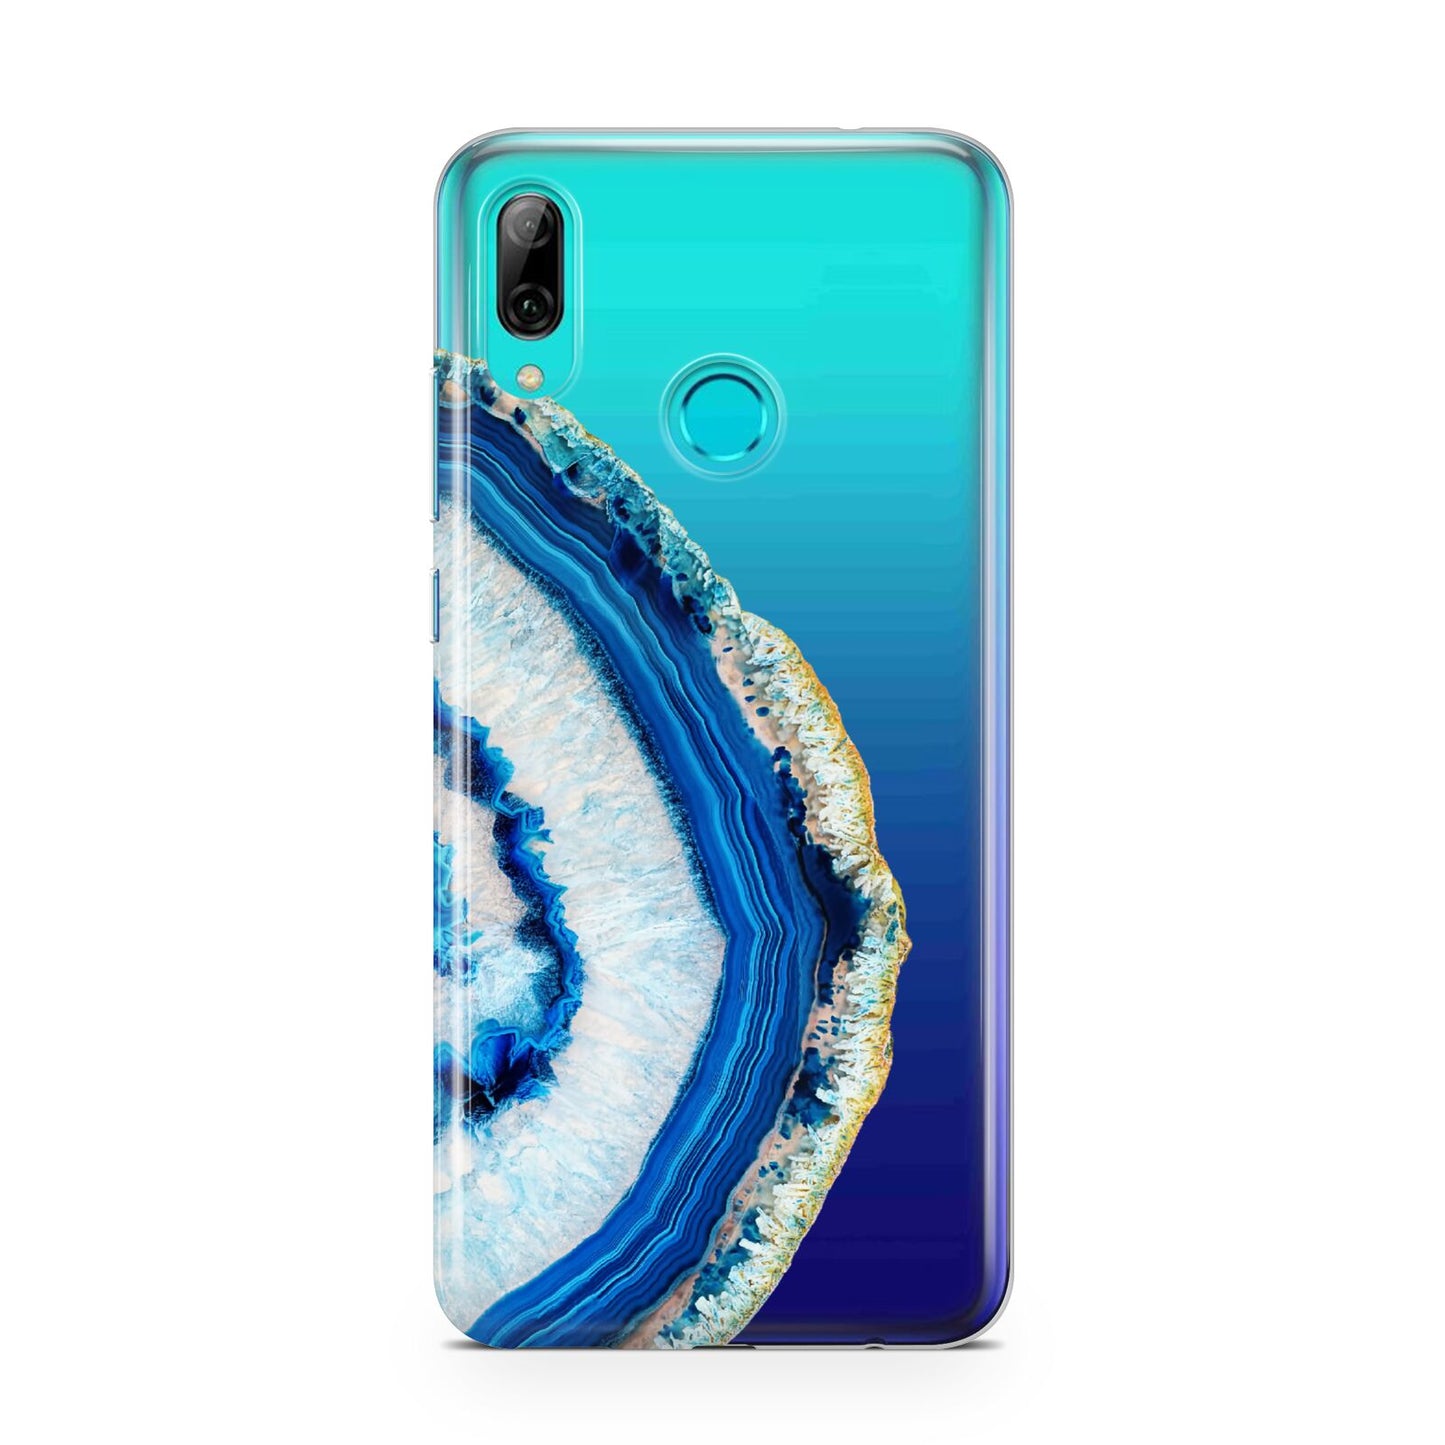 Agate Dark Blue and Turquoise Huawei P Smart 2019 Case